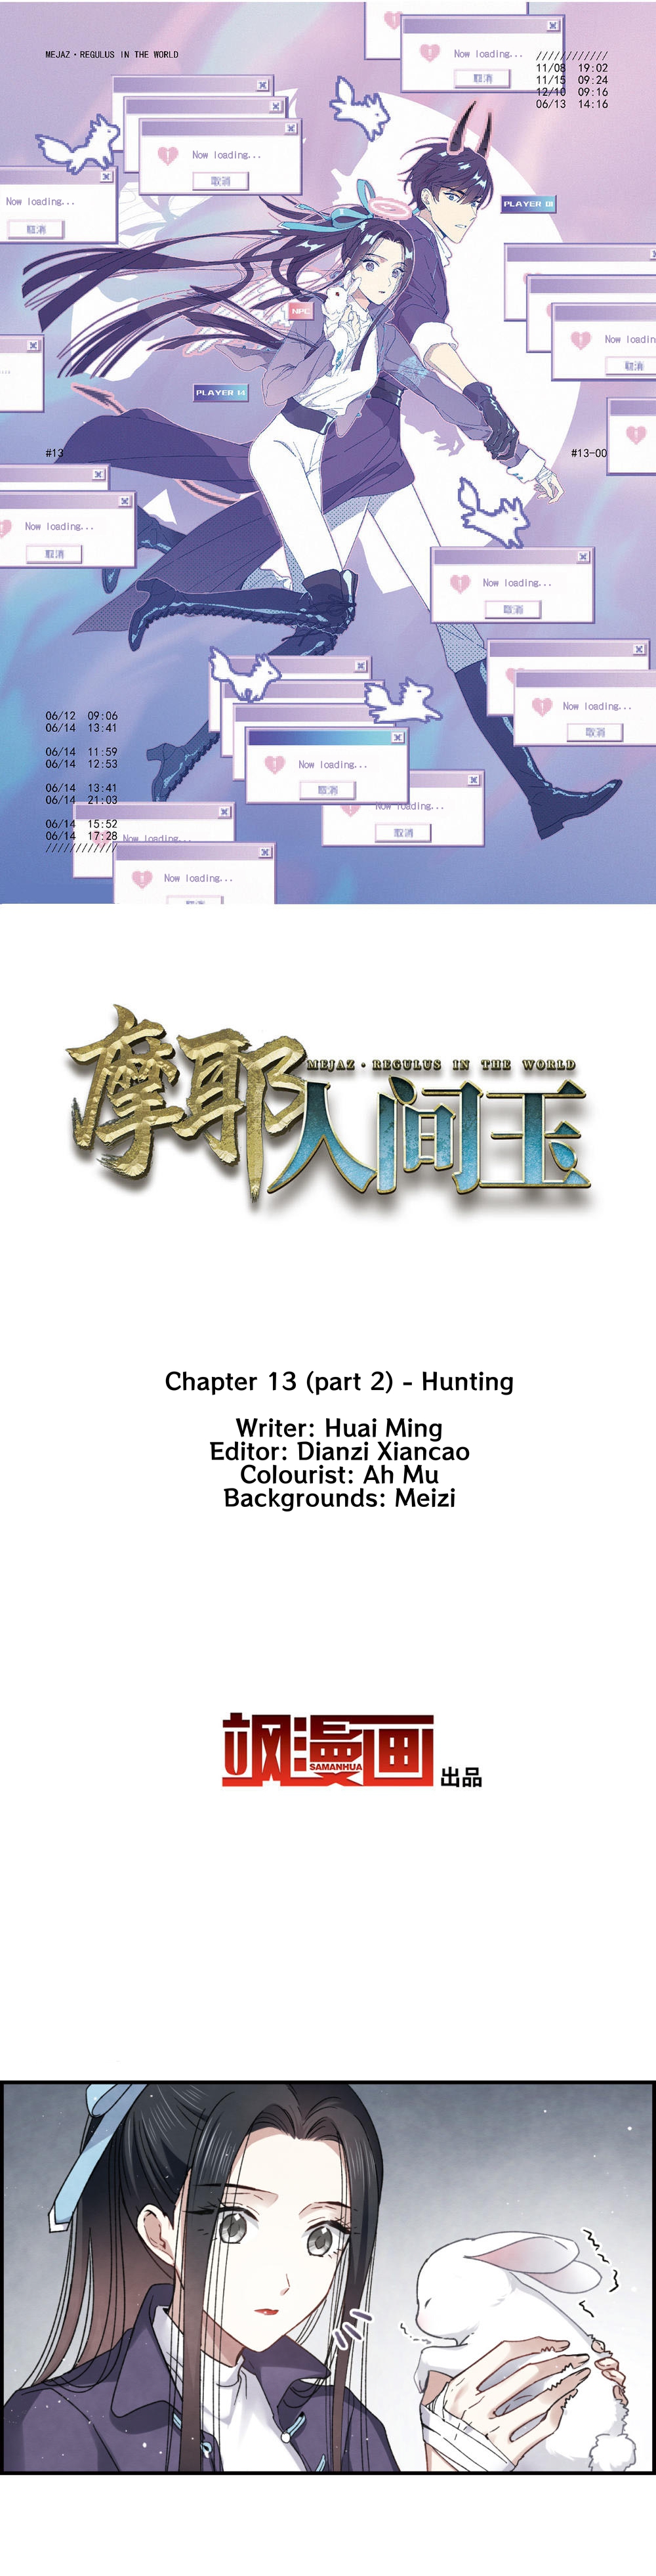 Mejaz Regulus in the World Ch. 13.2 Hunting